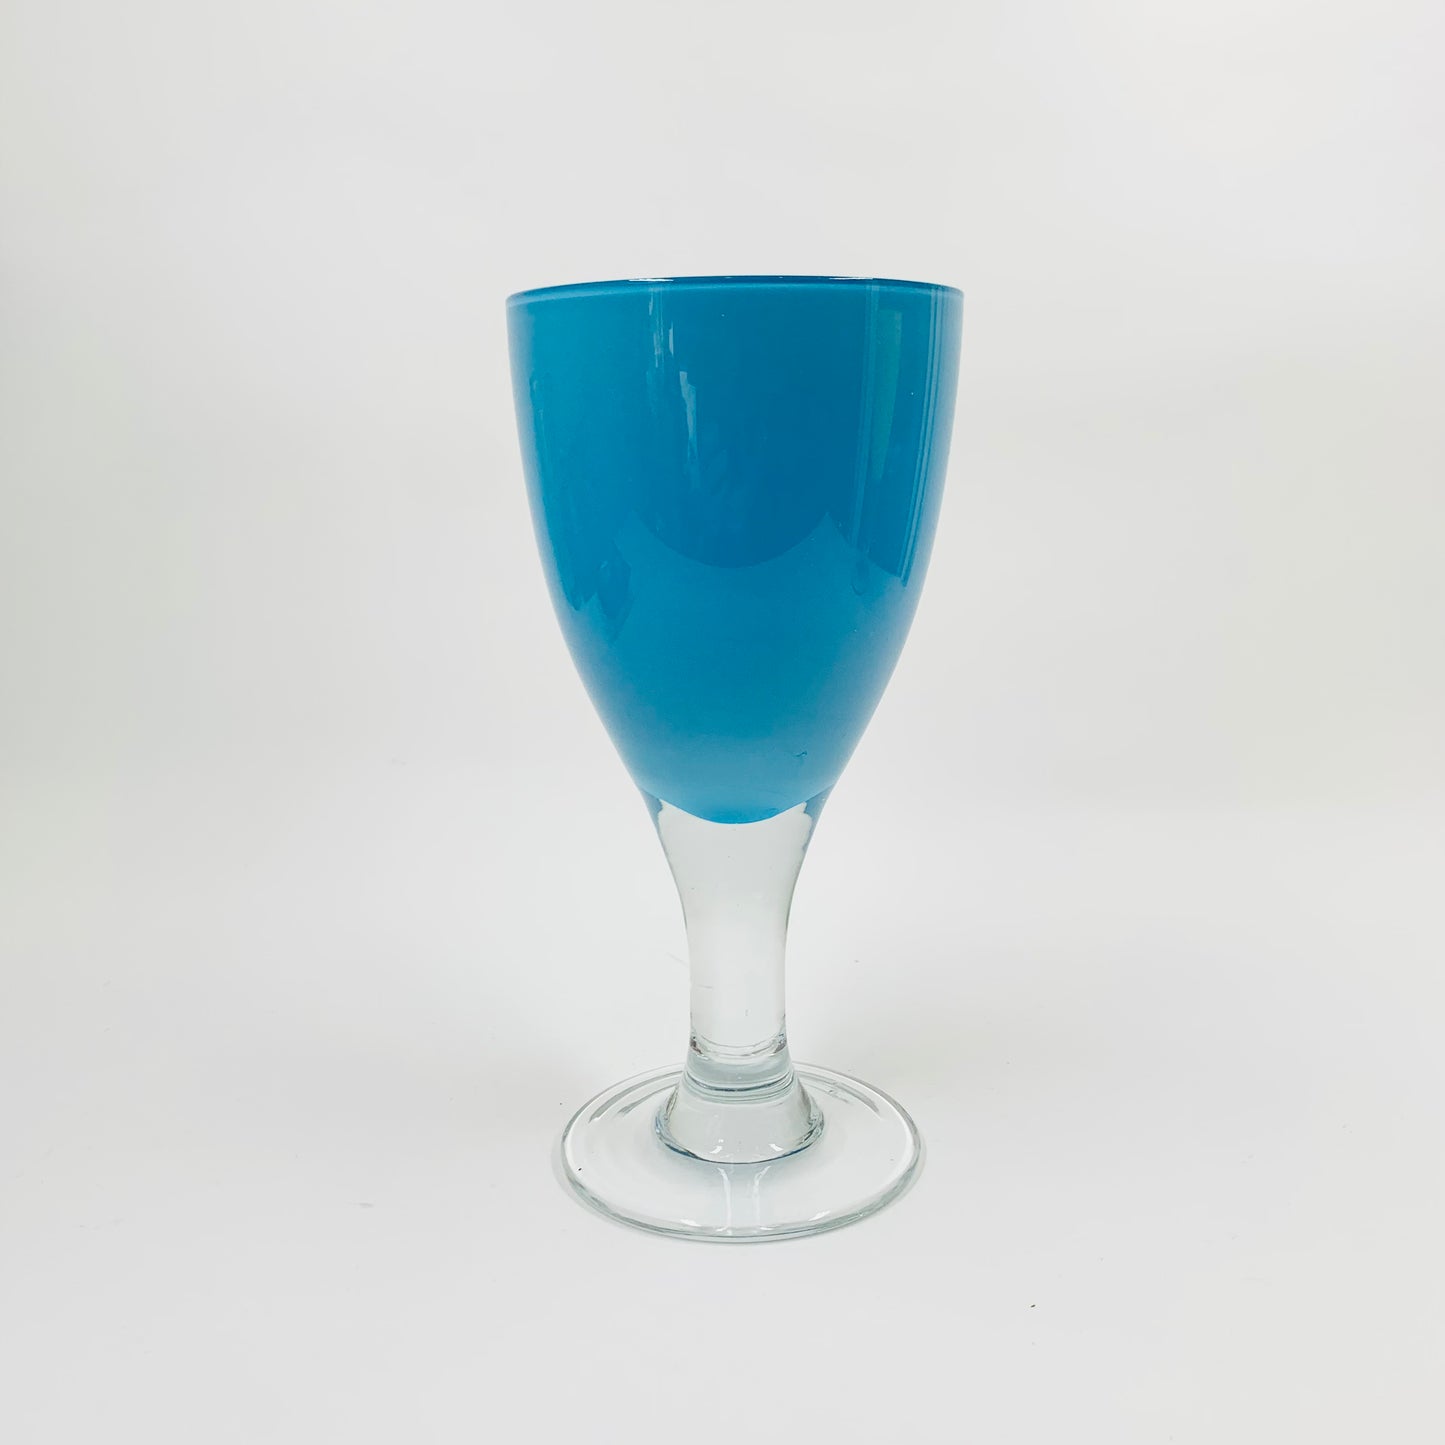 1980s Memphis blue and yellow cased glass wine goblets